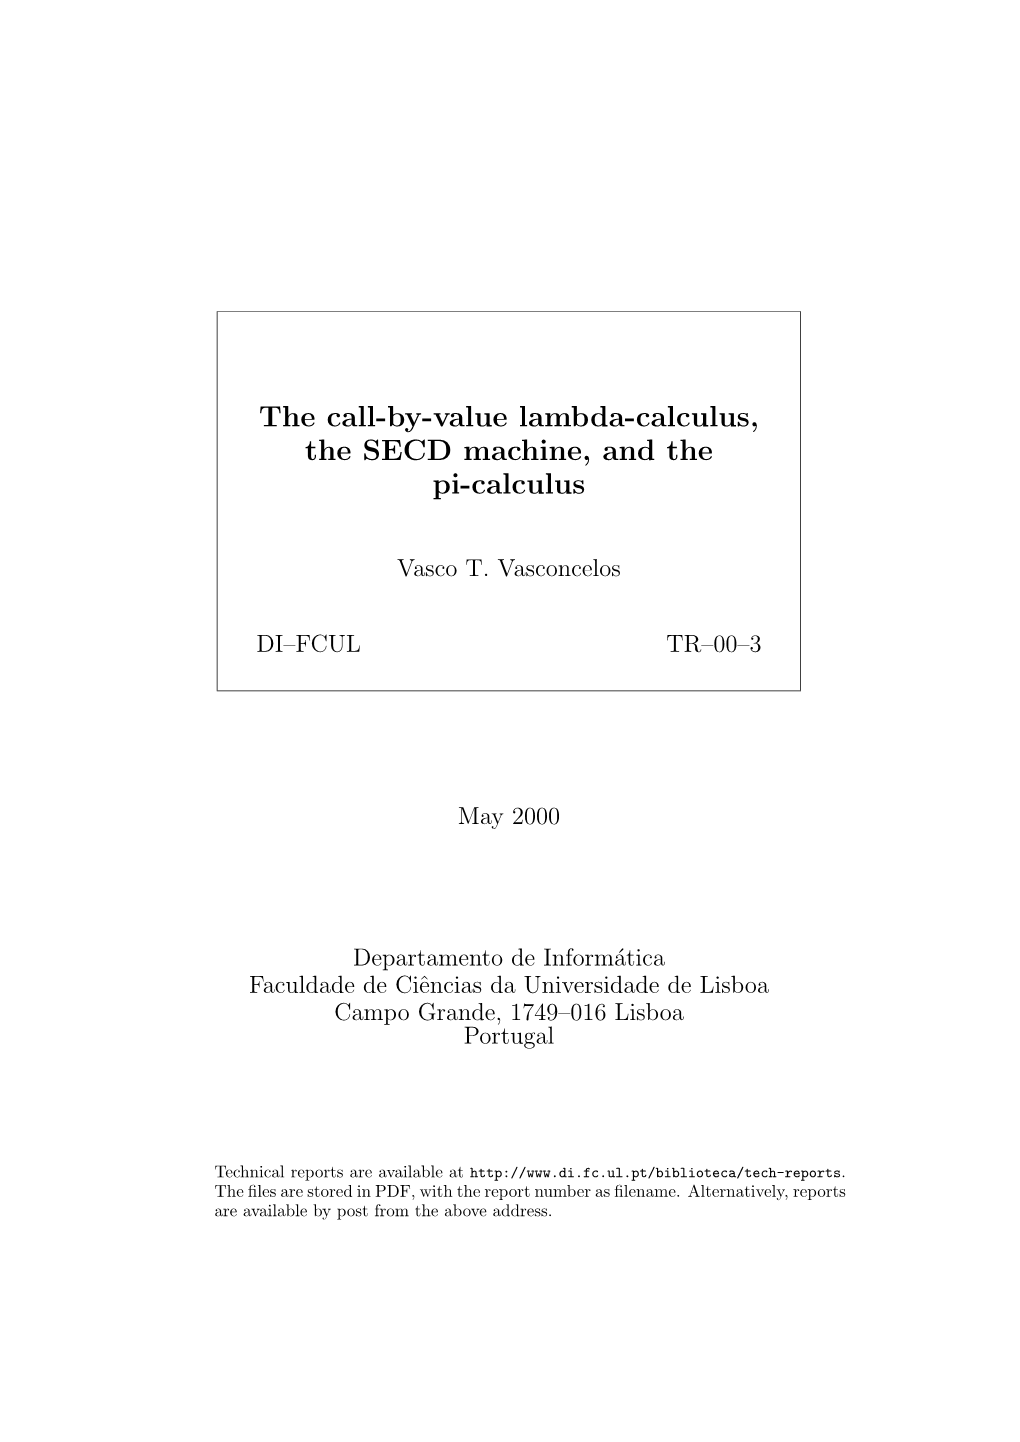 The Call-By-Value Lambda-Calculus, the SECD Machine, and the Pi-Calculus